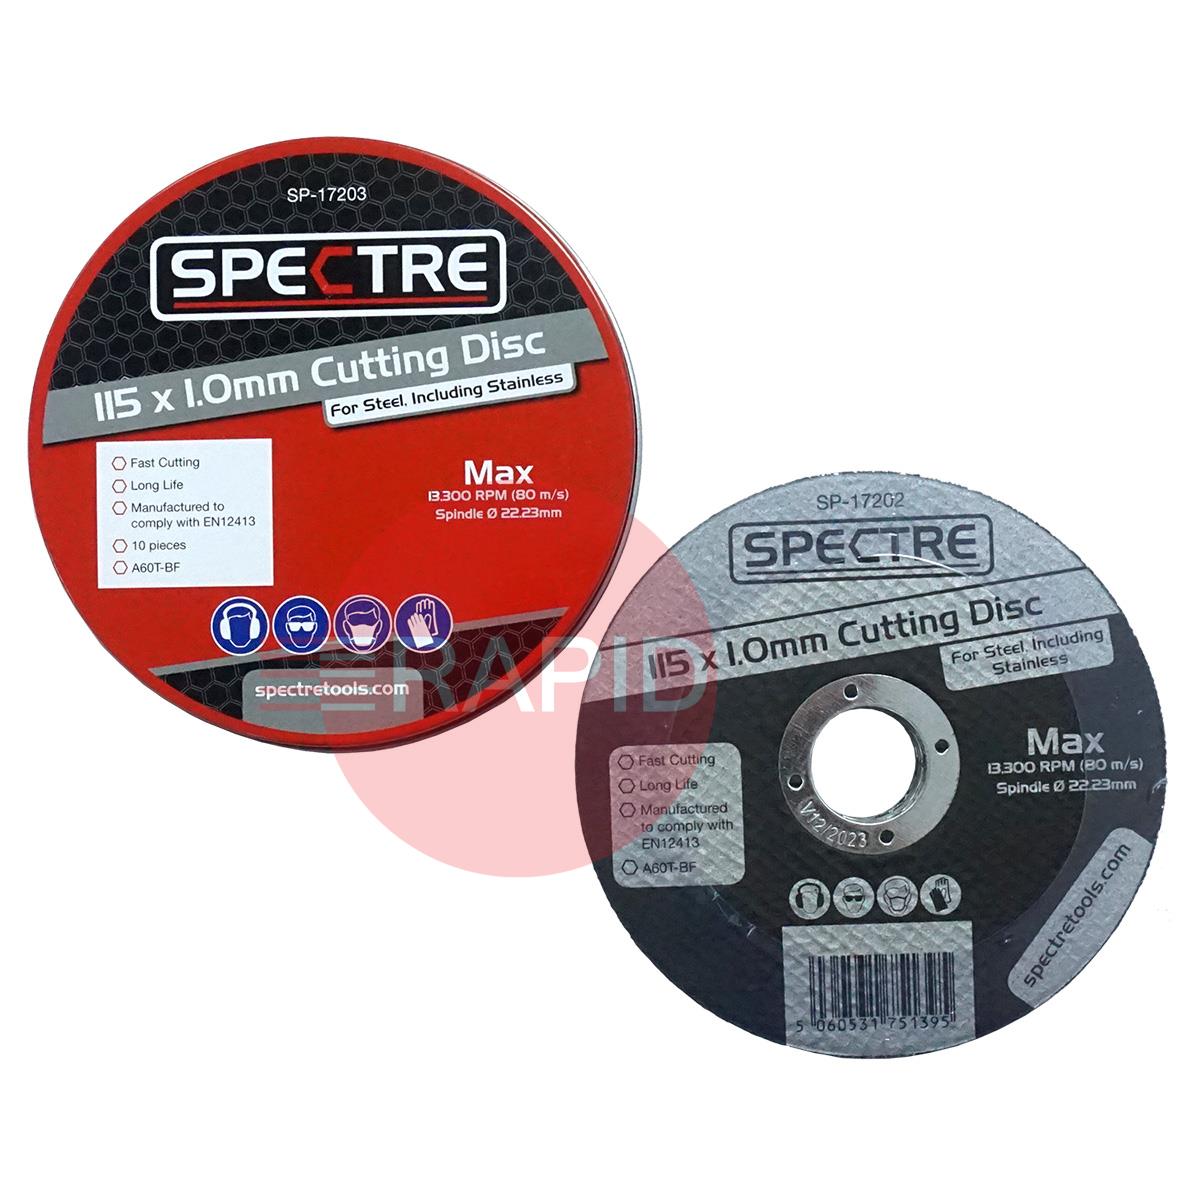 SP-17203  Spectre 115mm (4.5) Slitting Cutting Disc 1mm Thick. Grade A60T-BF for Steel & Stainless Steel. (Tin of 10)